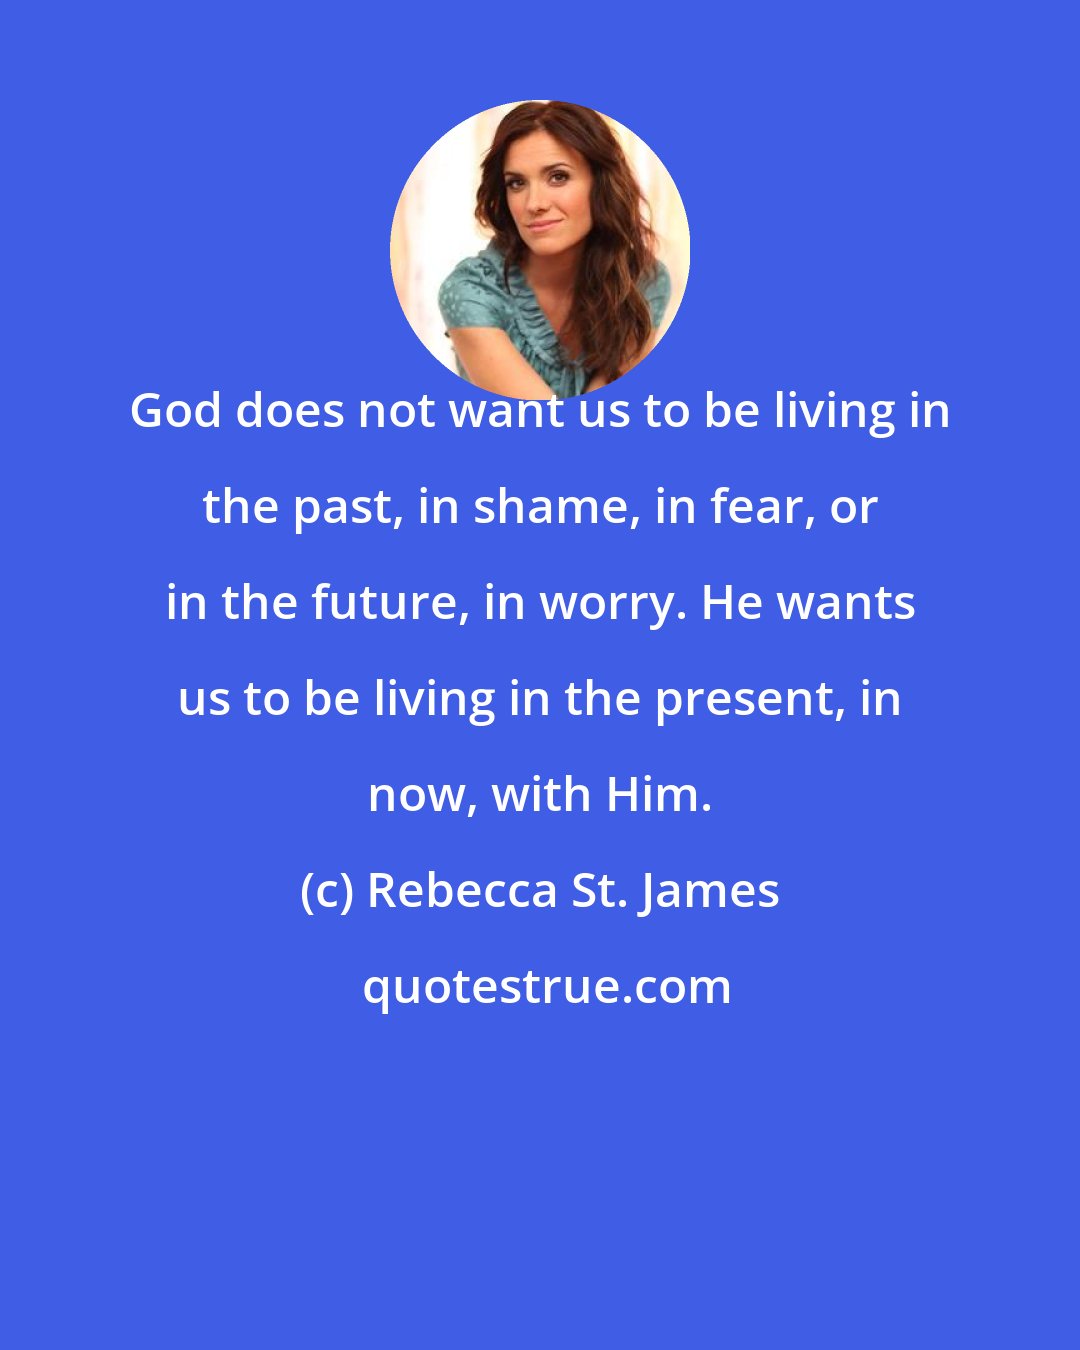 Rebecca St. James: God does not want us to be living in the past, in shame, in fear, or in the future, in worry. He wants us to be living in the present, in now, with Him.